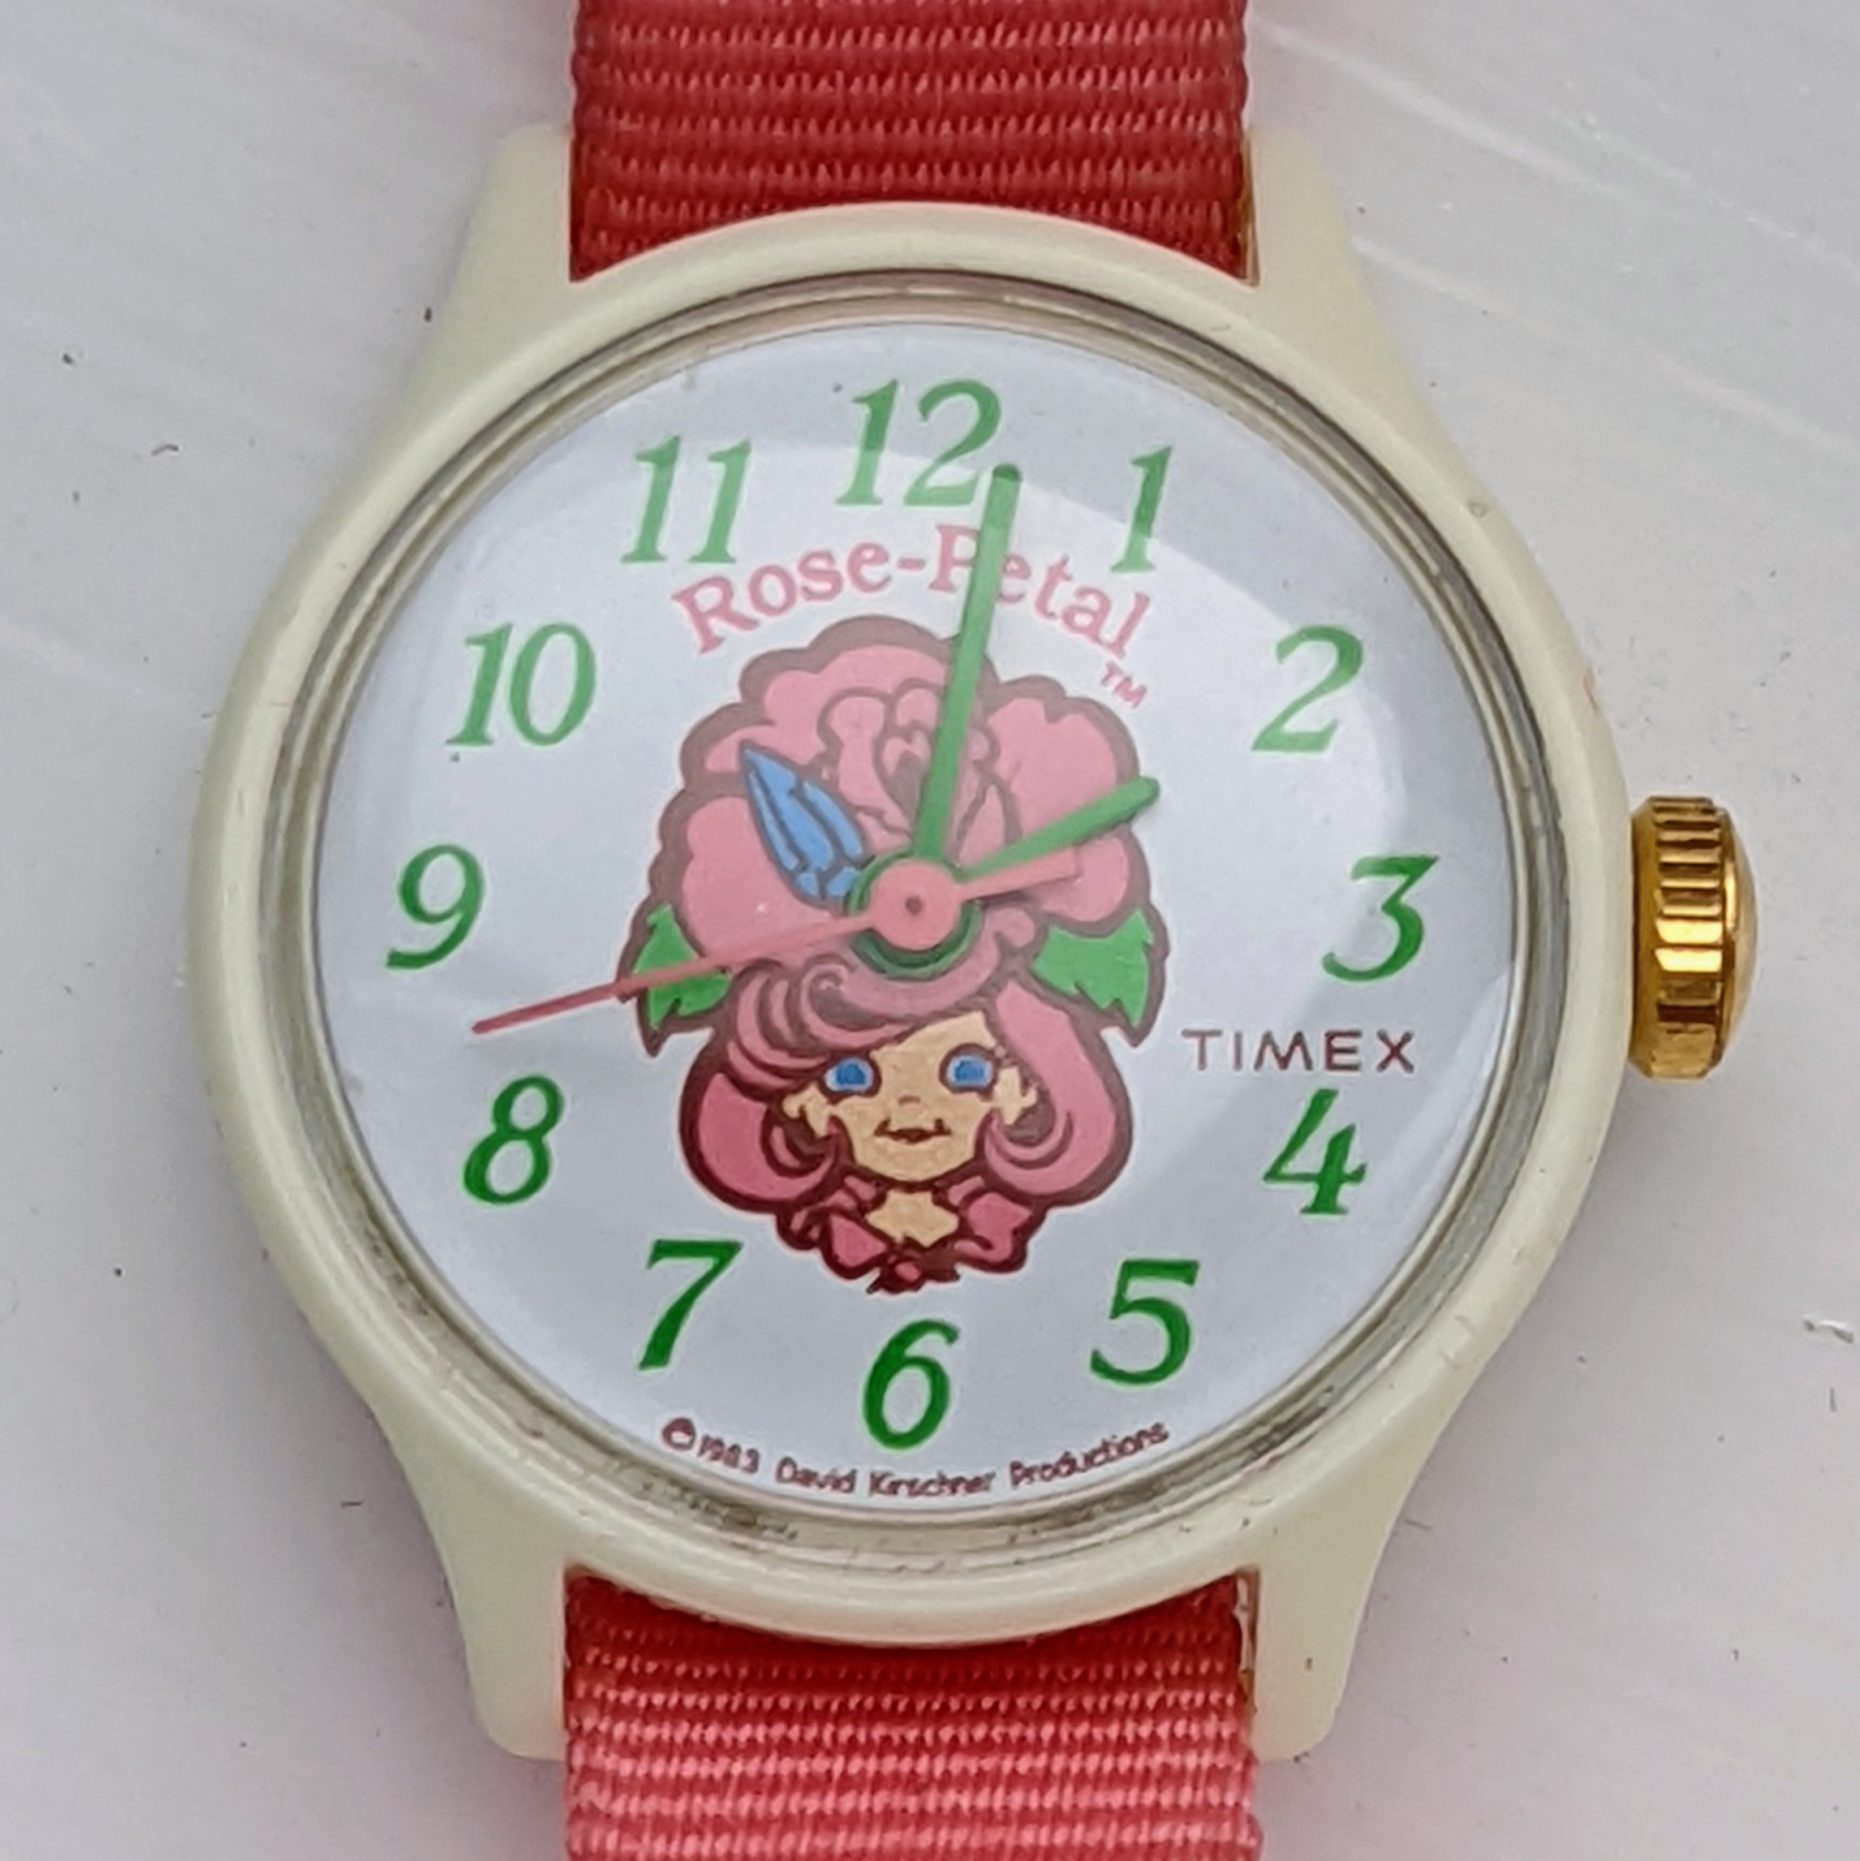 Timex Rose Petal Place 19991 10084 [1984] Petite / Character Watch